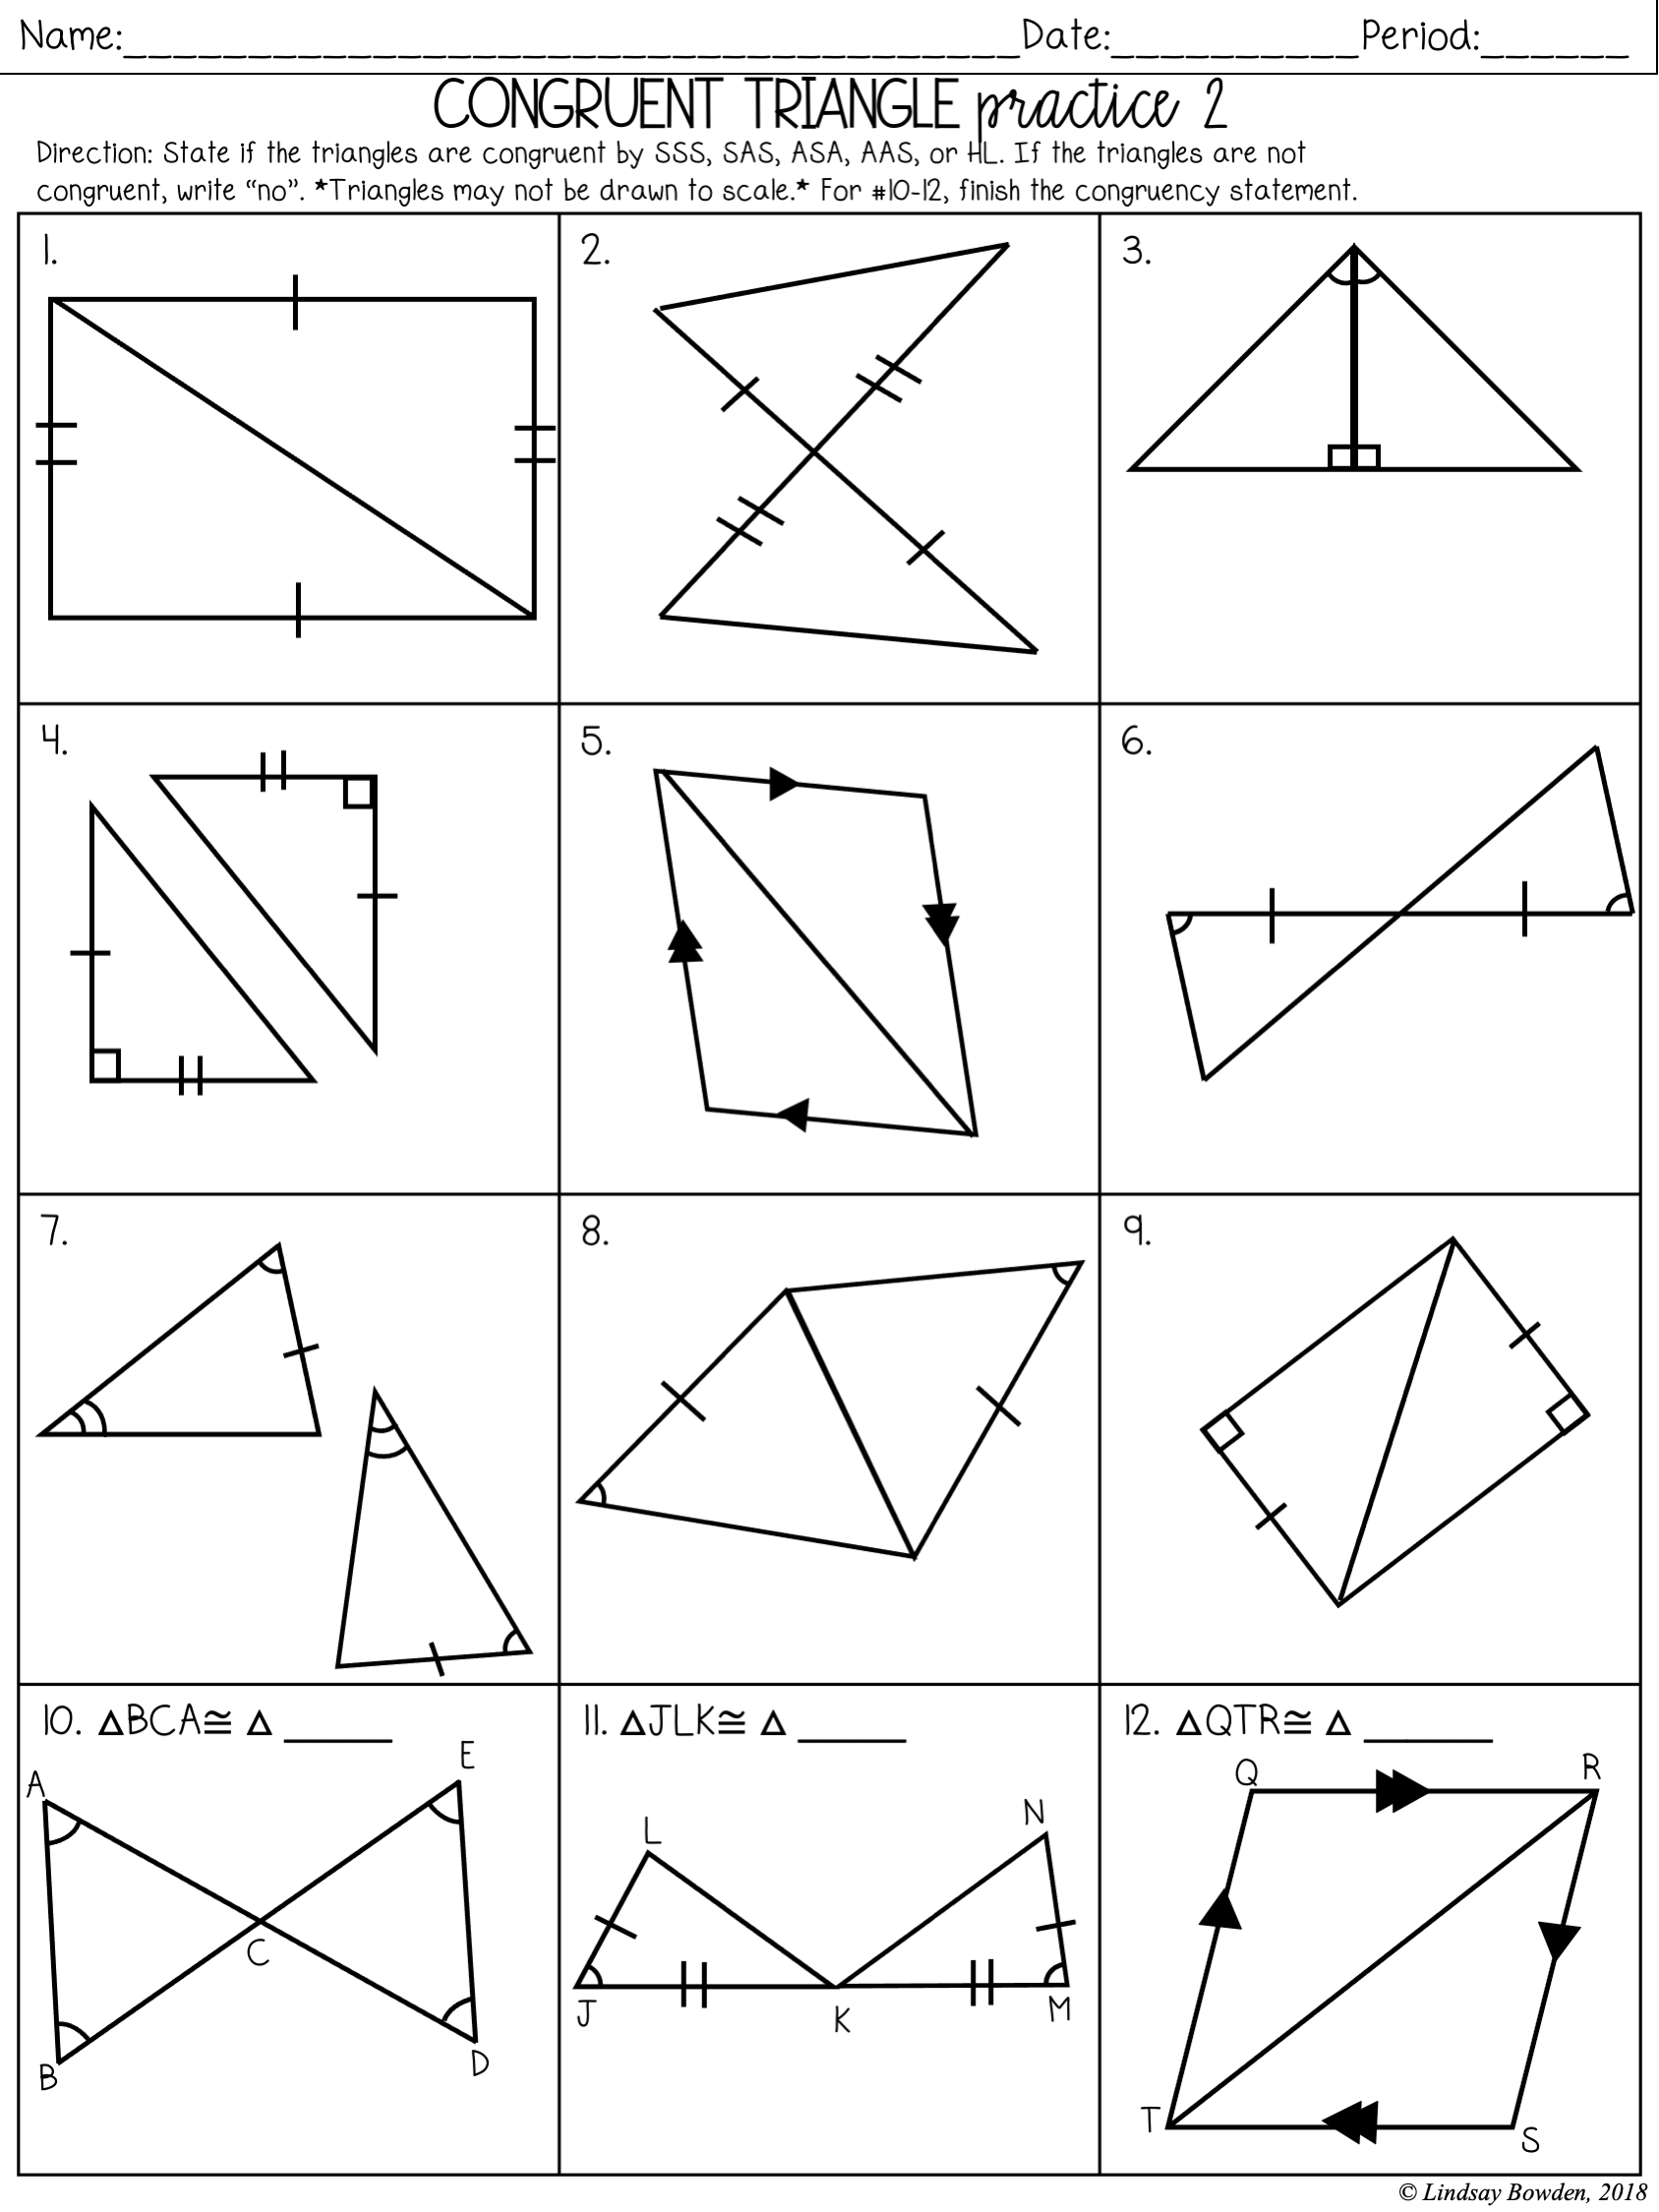 Congruent Triangles Notes and Worksheets - Lindsay Bowden Regarding Congruent Triangles Worksheet Answers